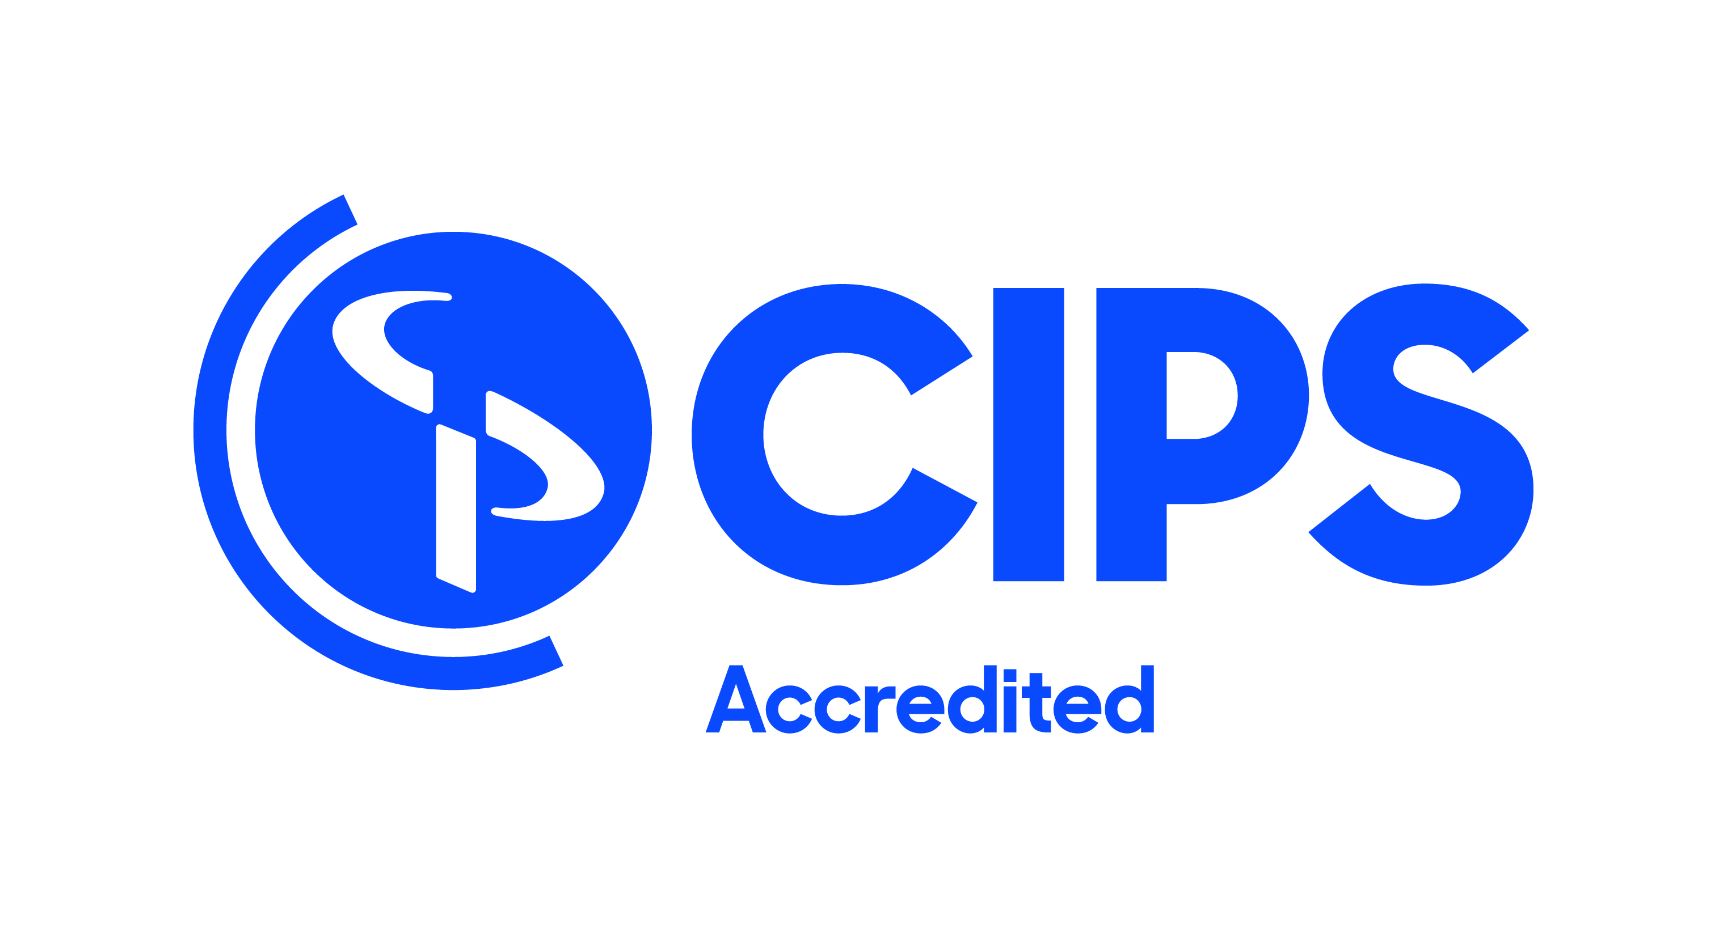 Chartered Institute of Purchasing & Supply